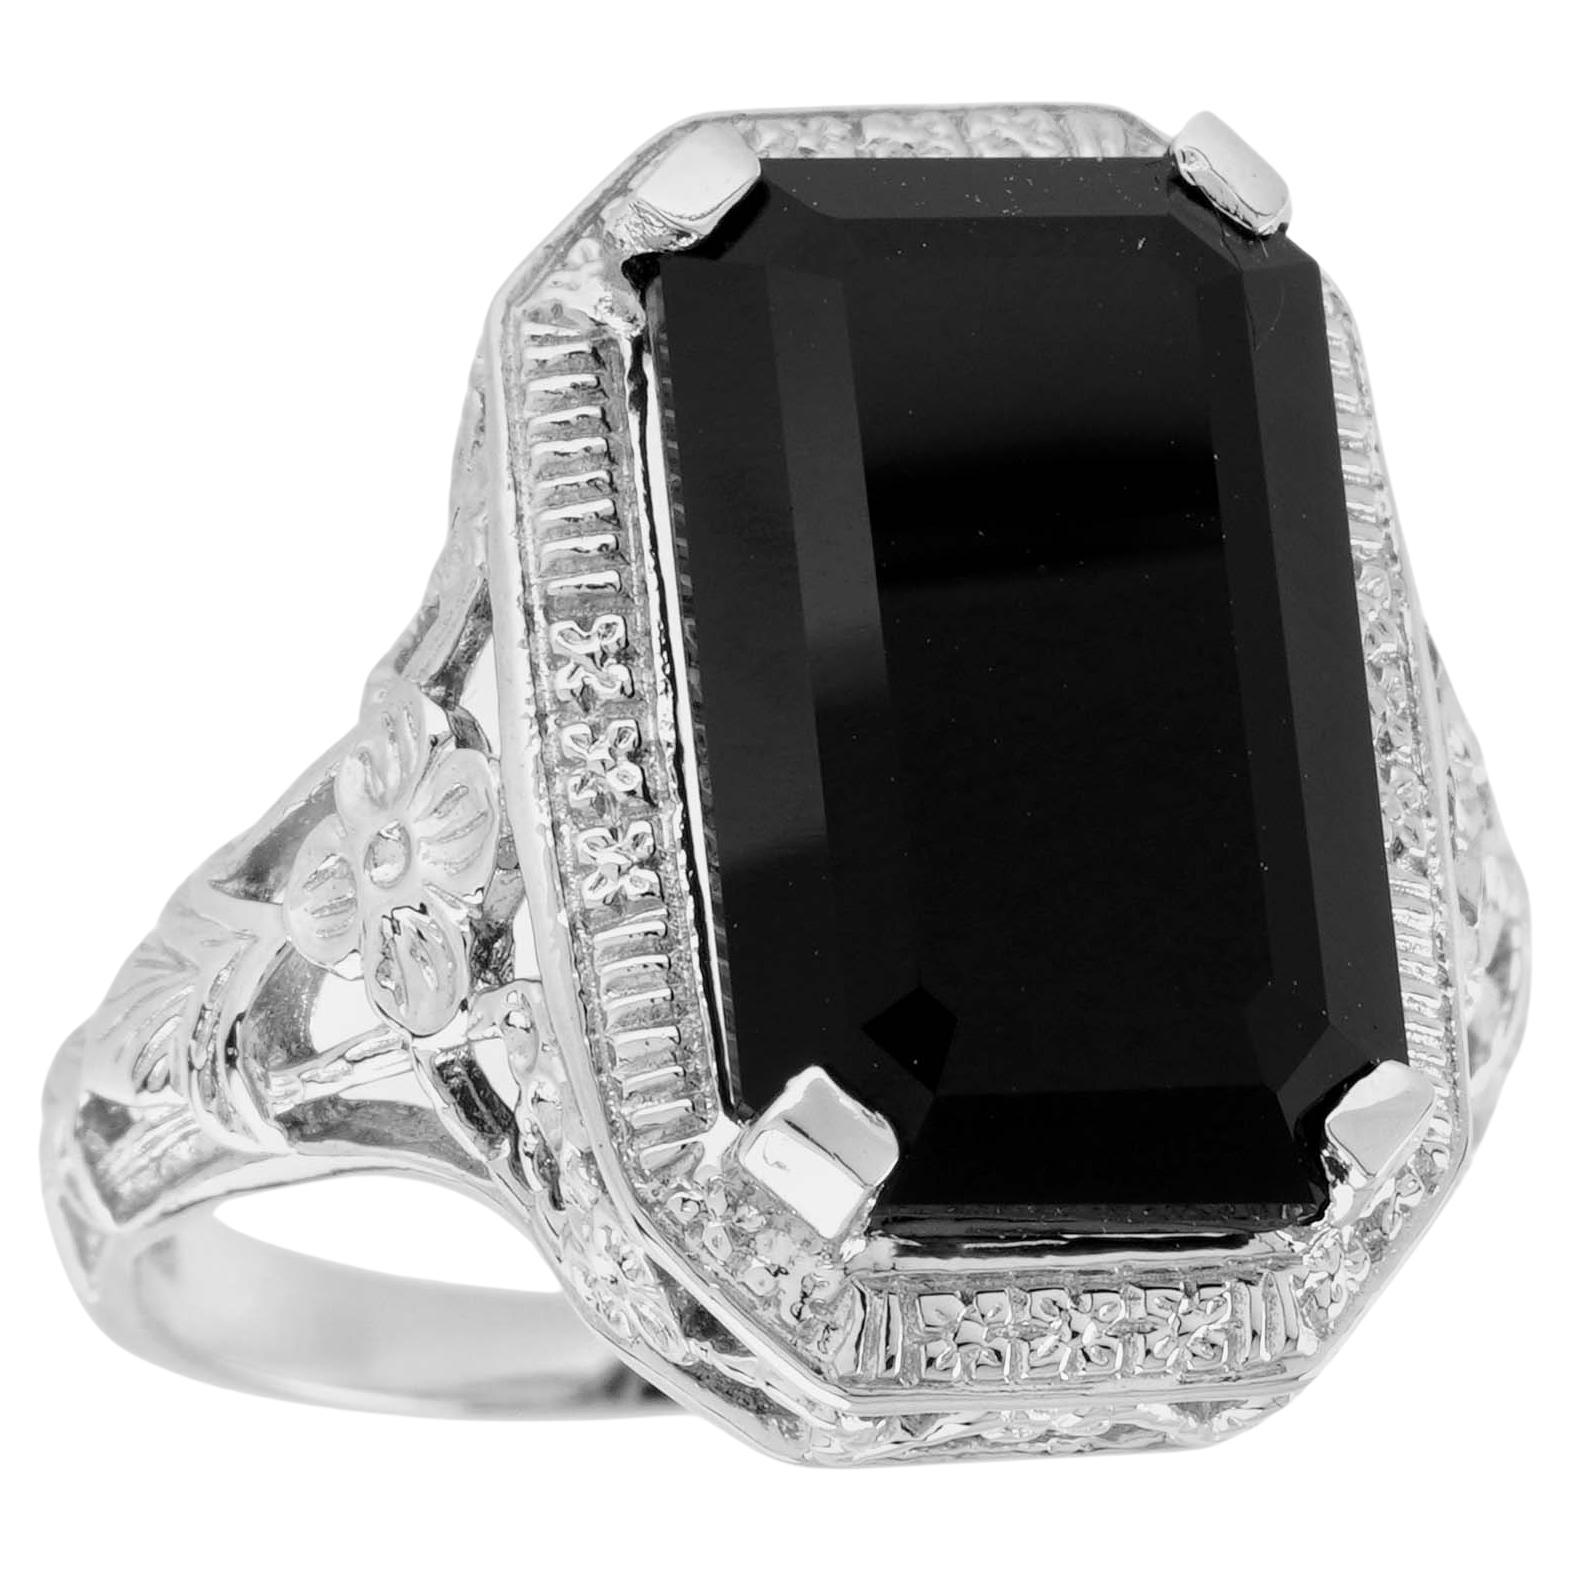 For Sale:  Natural Onyx Emerald Cut Vintage Style Filigree Cocktail Ring in Solid 9K Gold